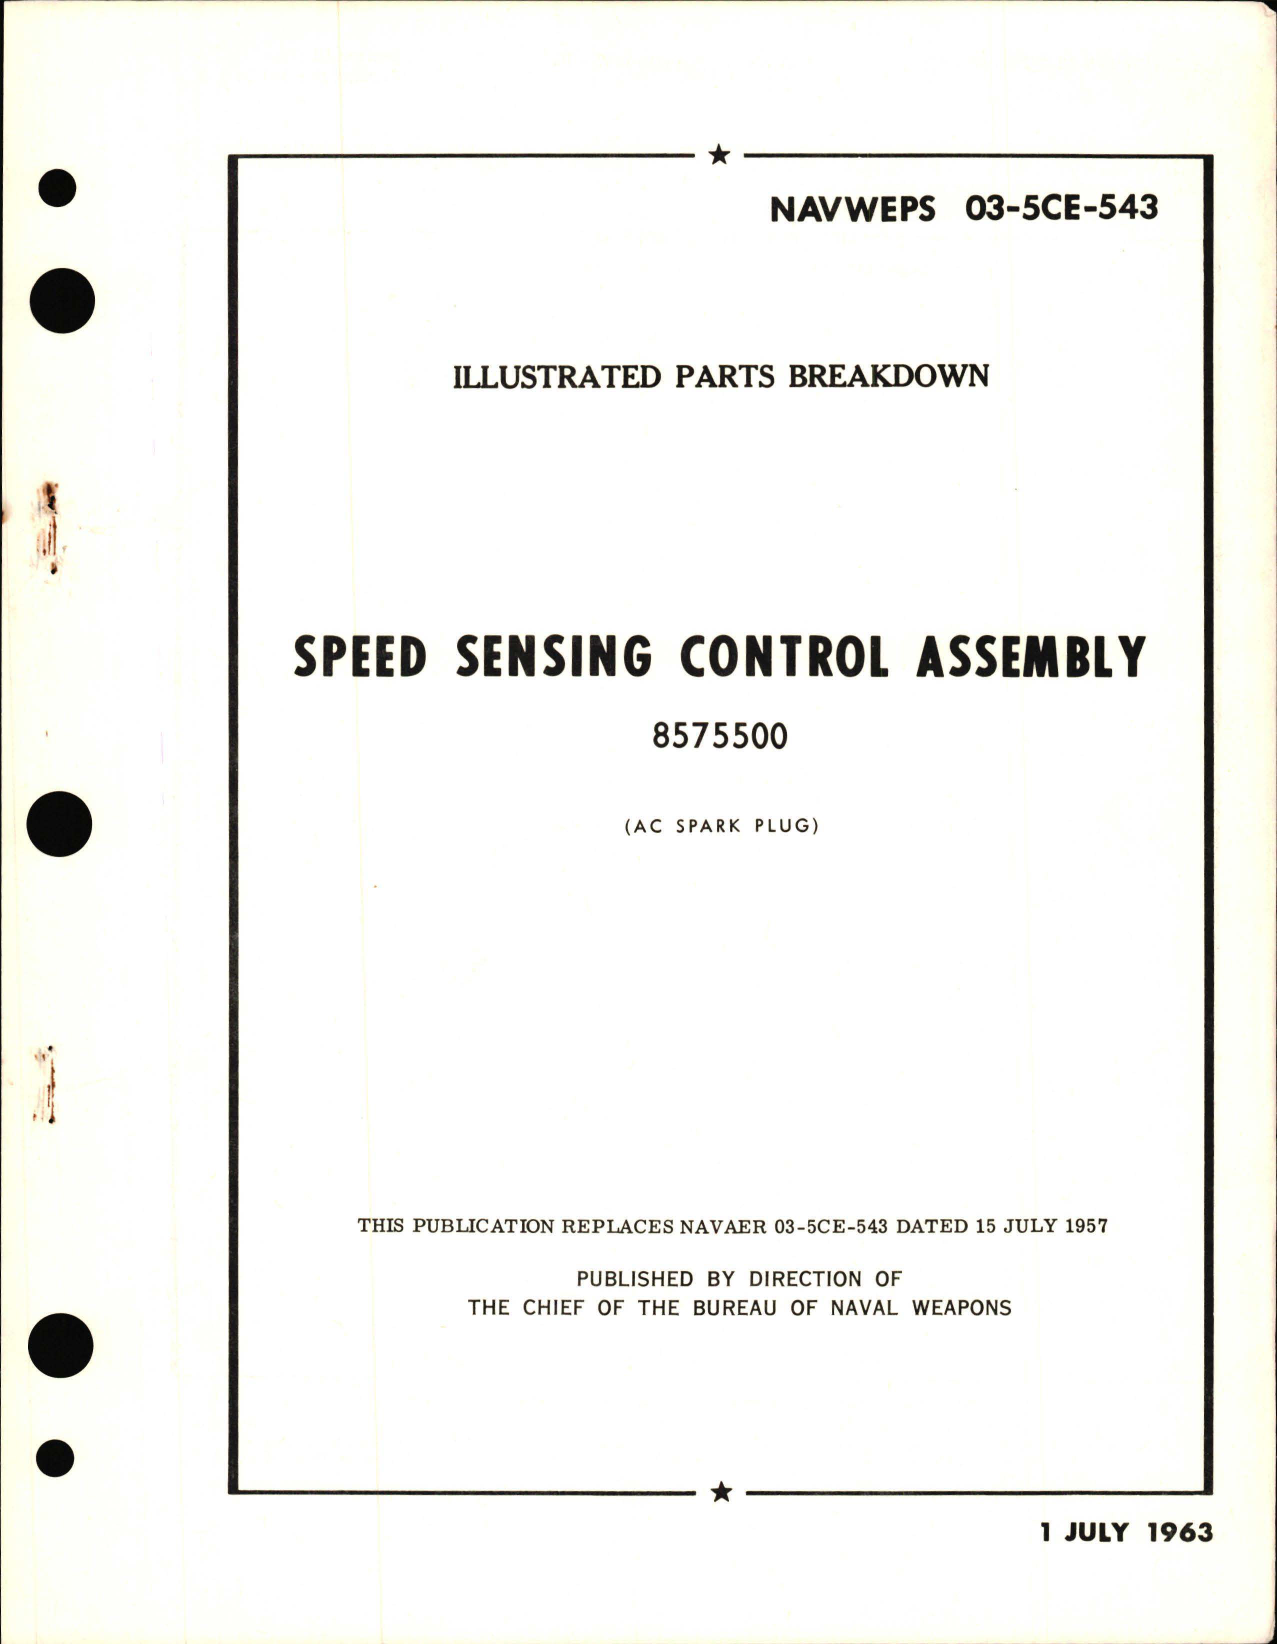 Sample page 1 from AirCorps Library document: Illustrated Parts Breakdown for Speed Sensing Control Assembly 8575500 